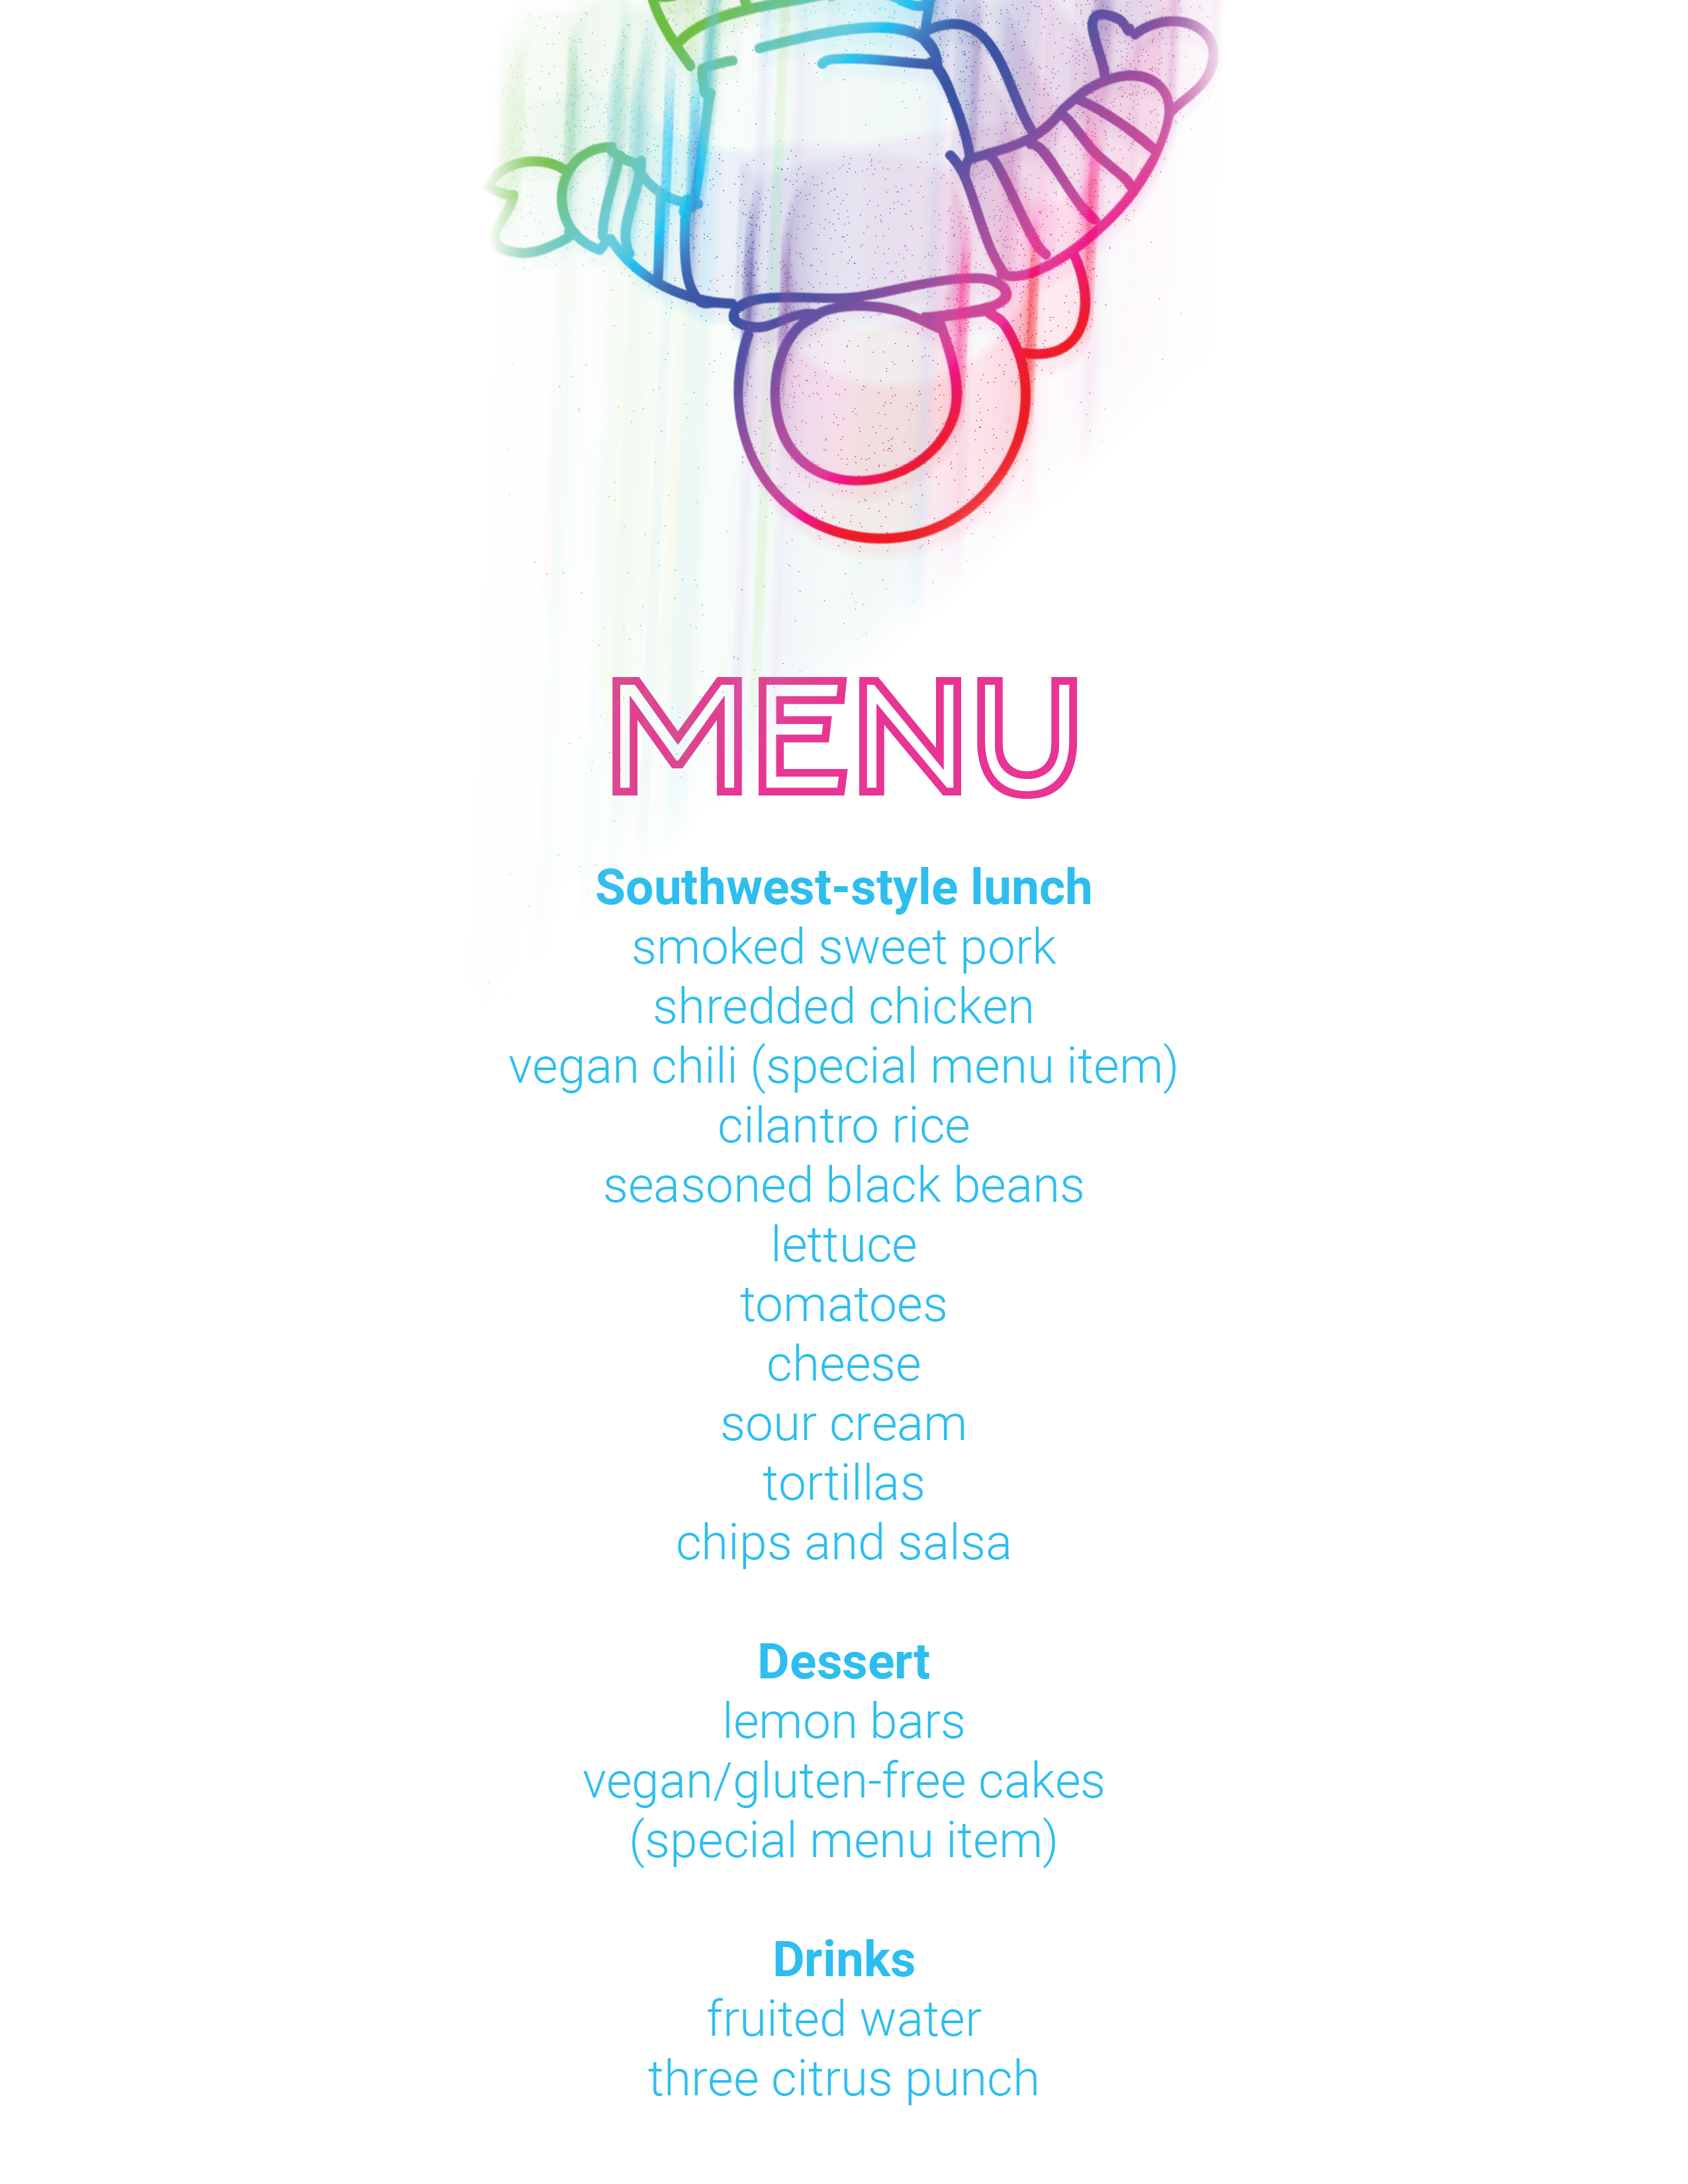 Click on the image to download the menu.